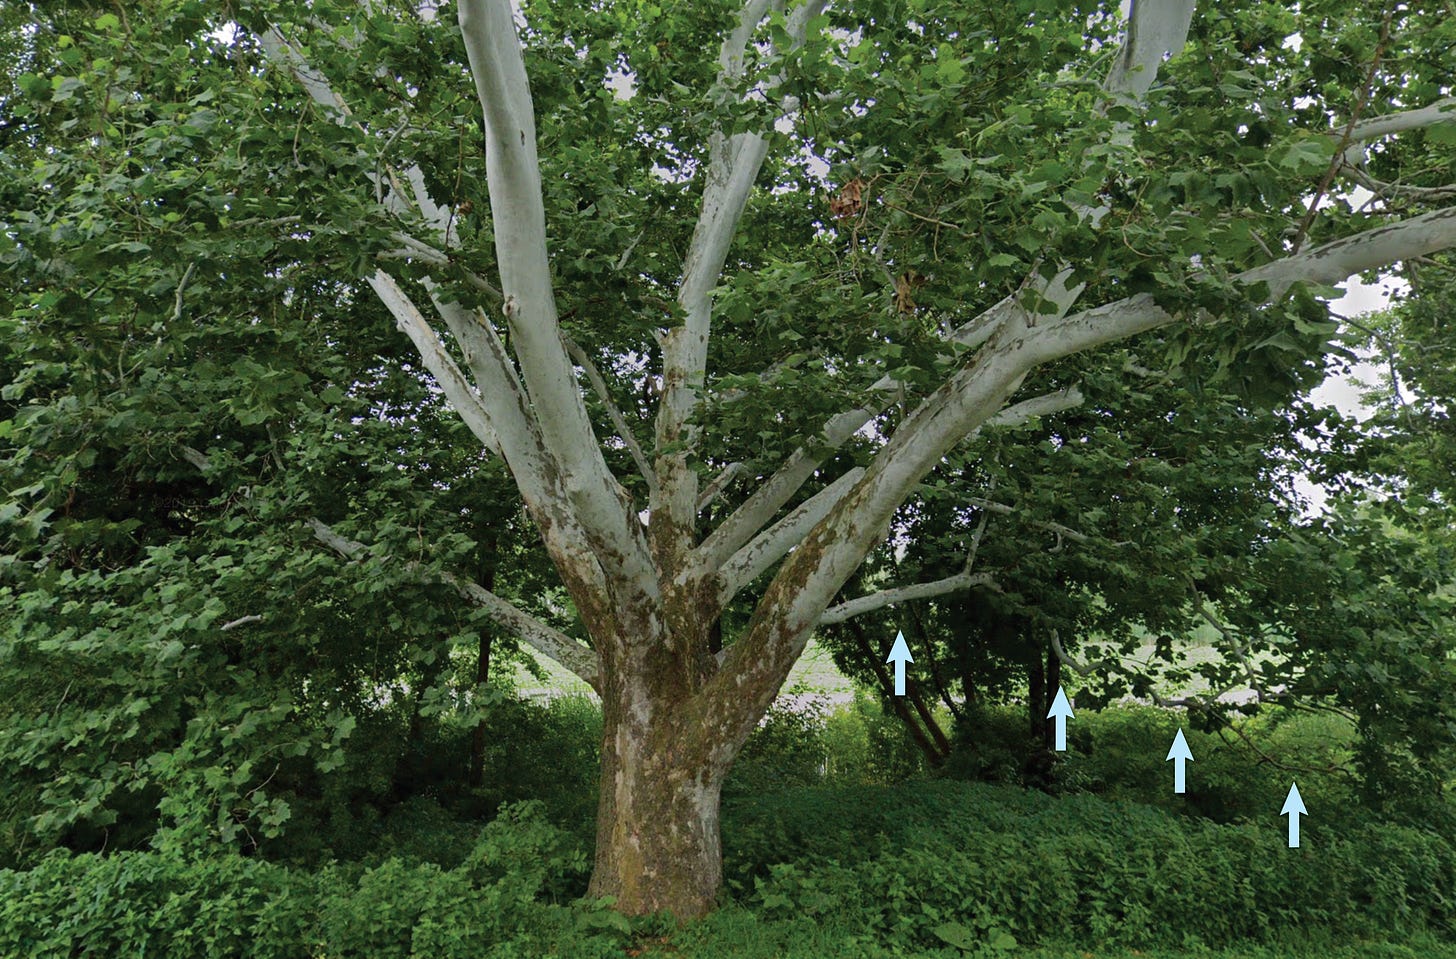 An American sycamore tree, with a long branch marked by arrows.